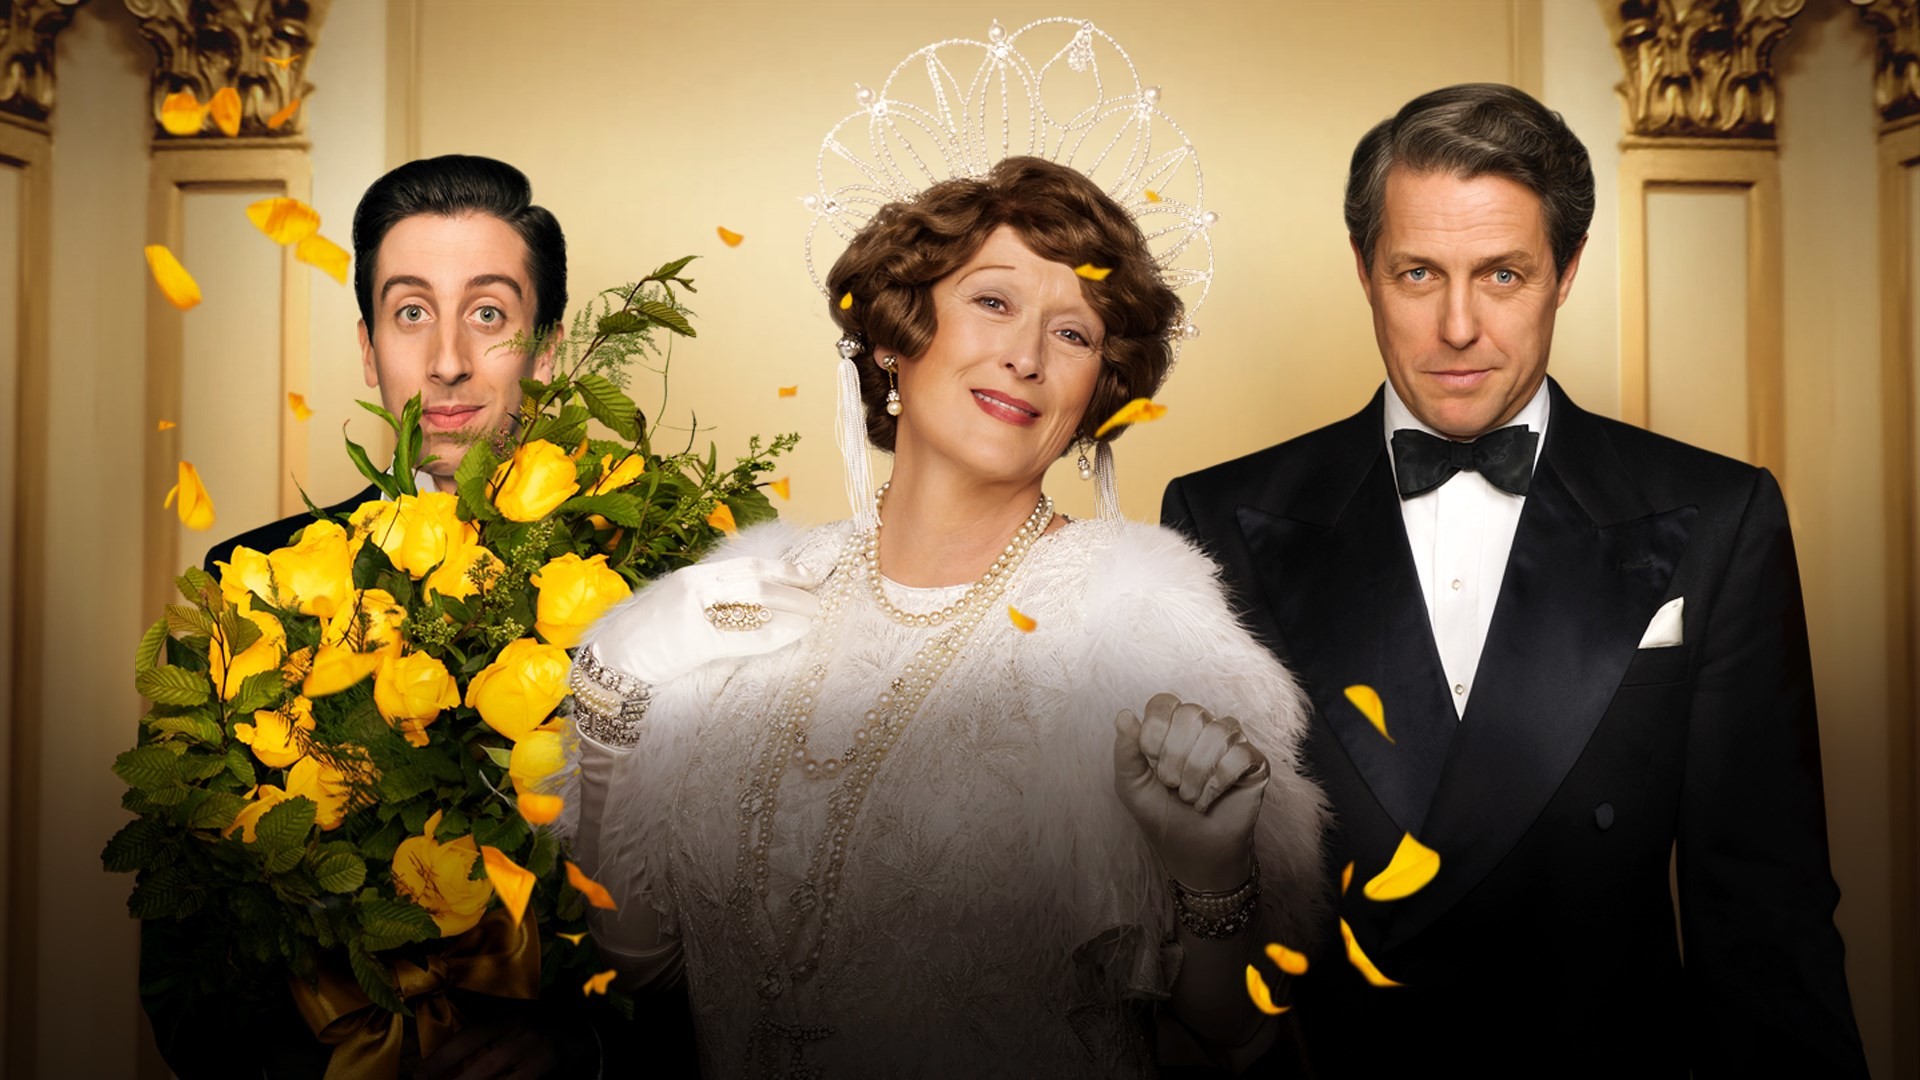 1920x1080 Background In High Quality - florence foster jenkins